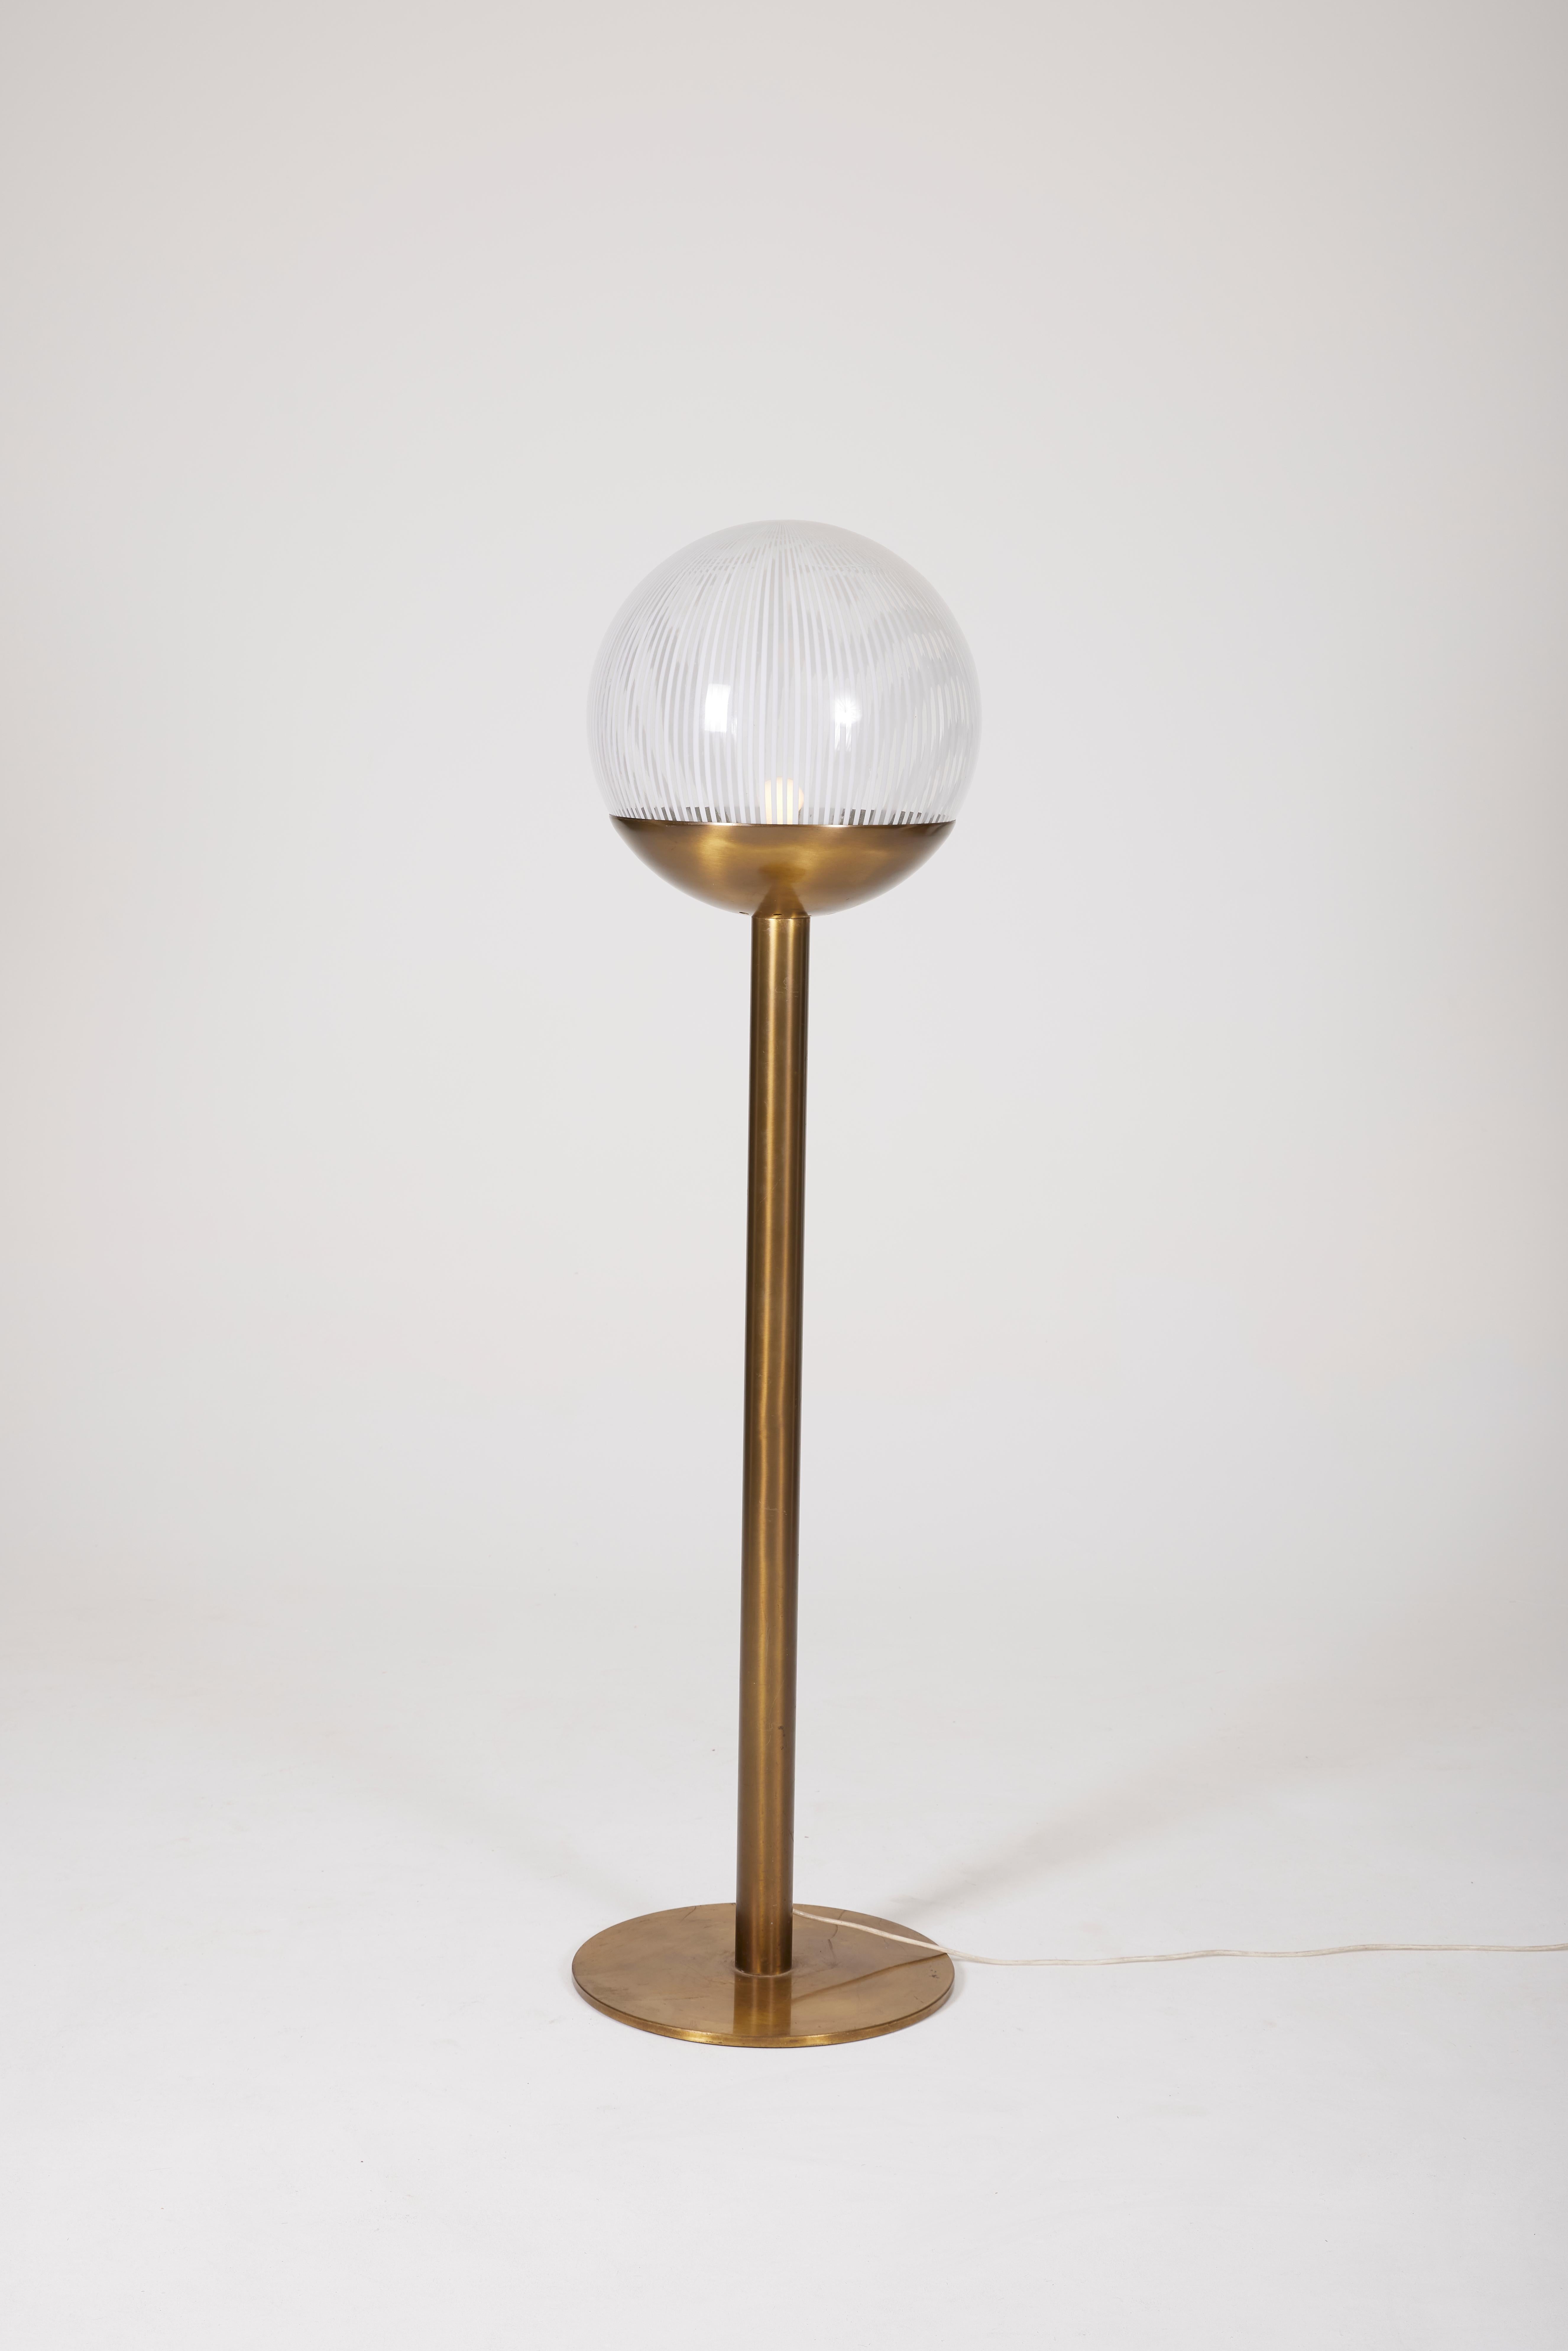 Brass and glass floor lamp by designer Paolo Venini (1895-1959), 1960s. The glass sphere features the highly skilled 